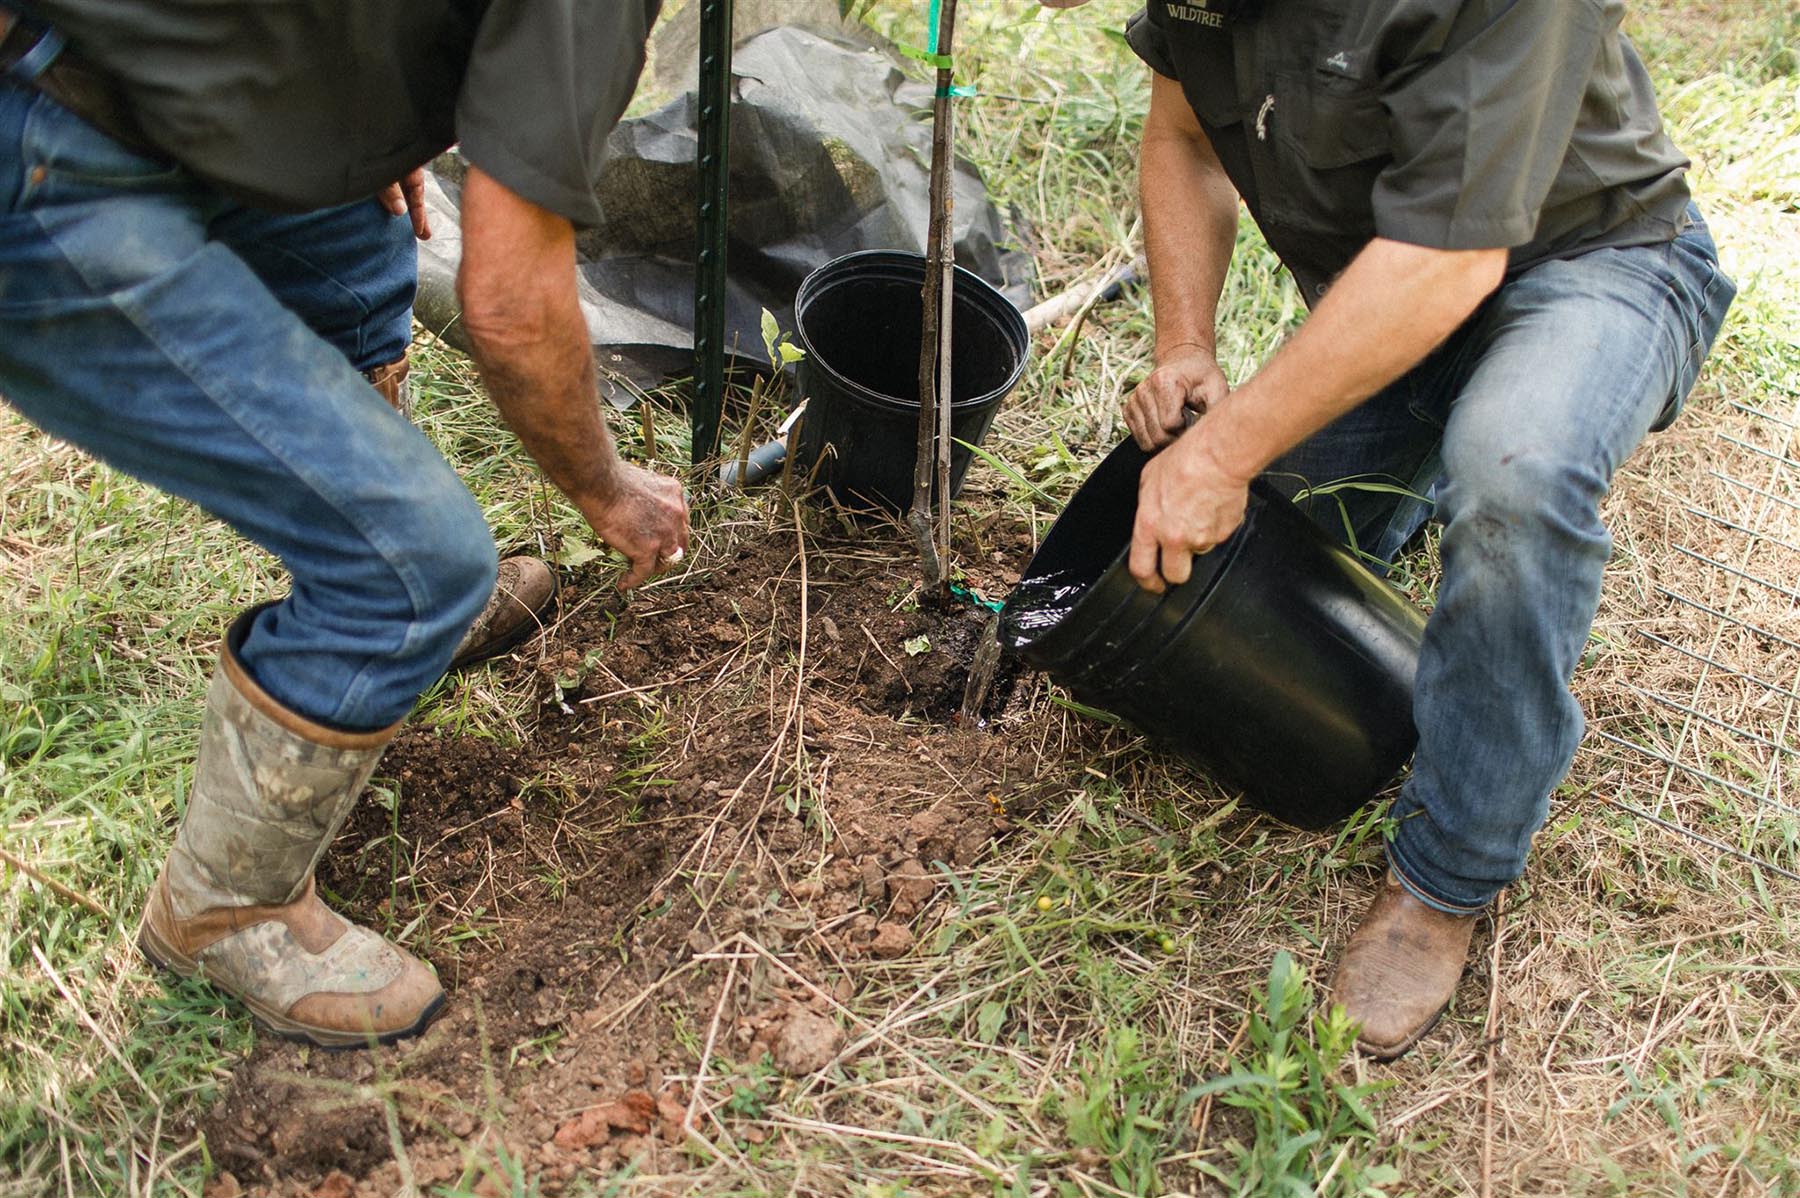 Preparing to plant a tree on a deer food plot